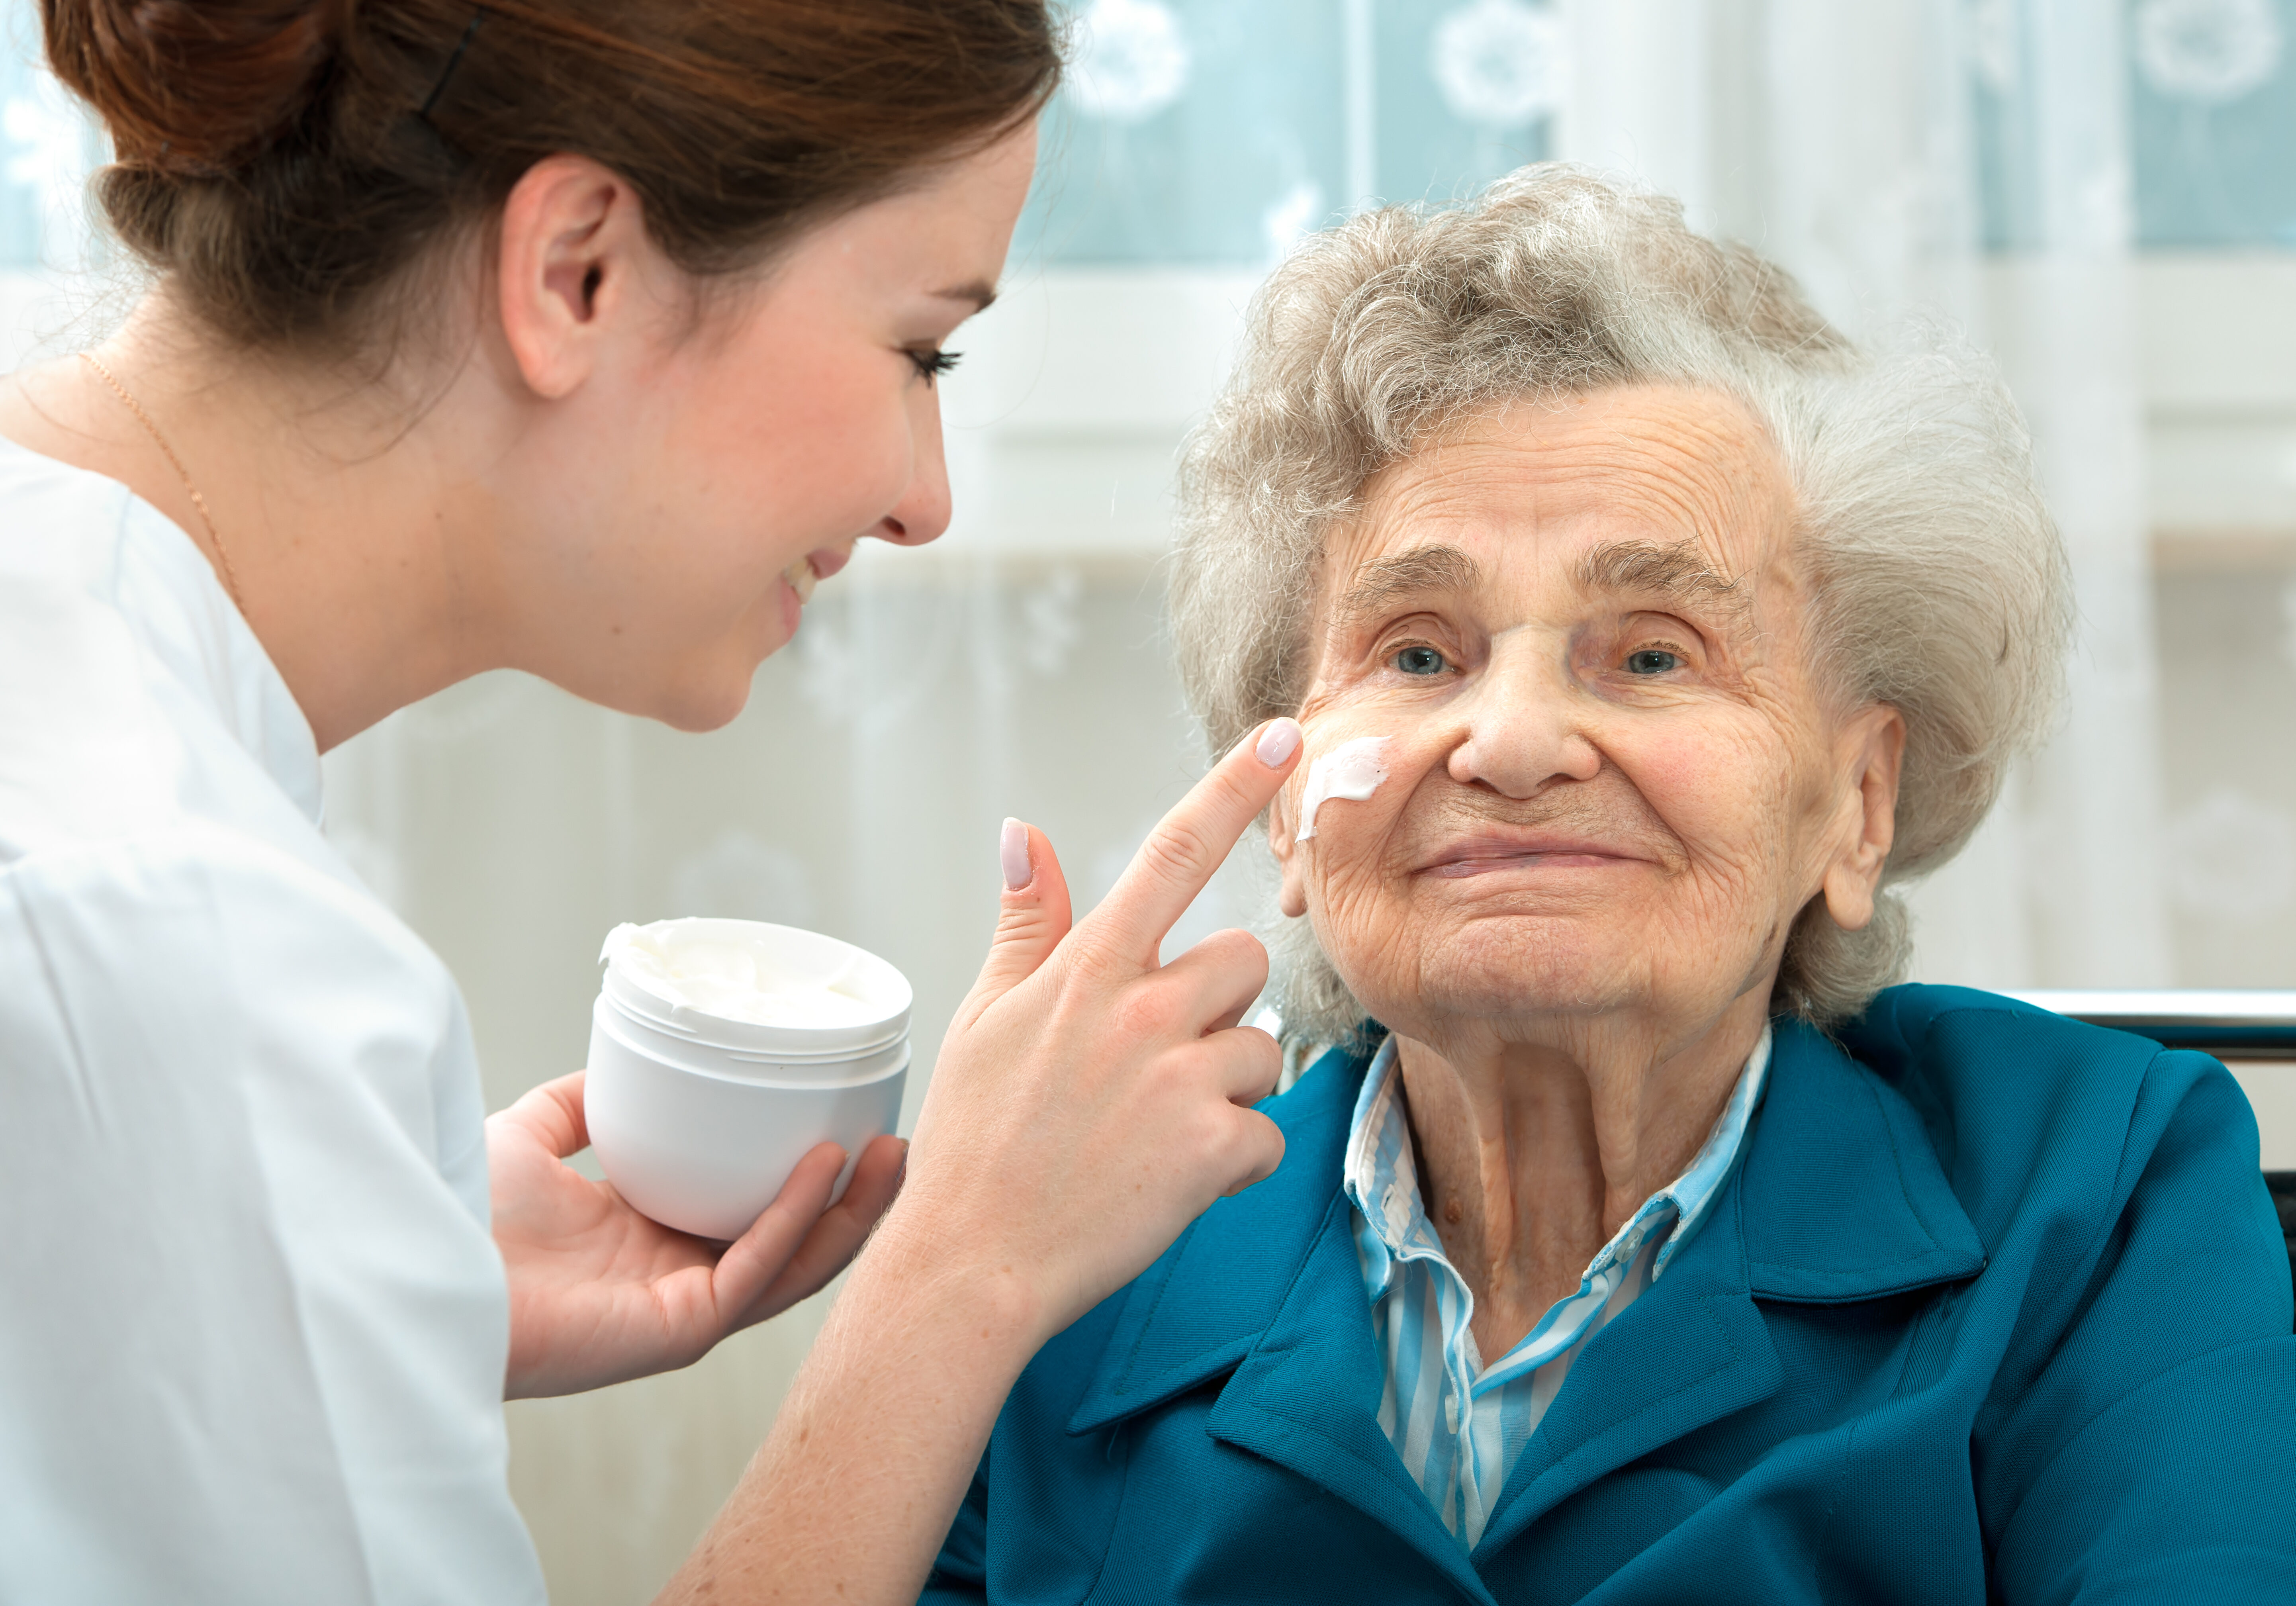 Nurse assists an elderly woman with skin care and hygiene measures at home